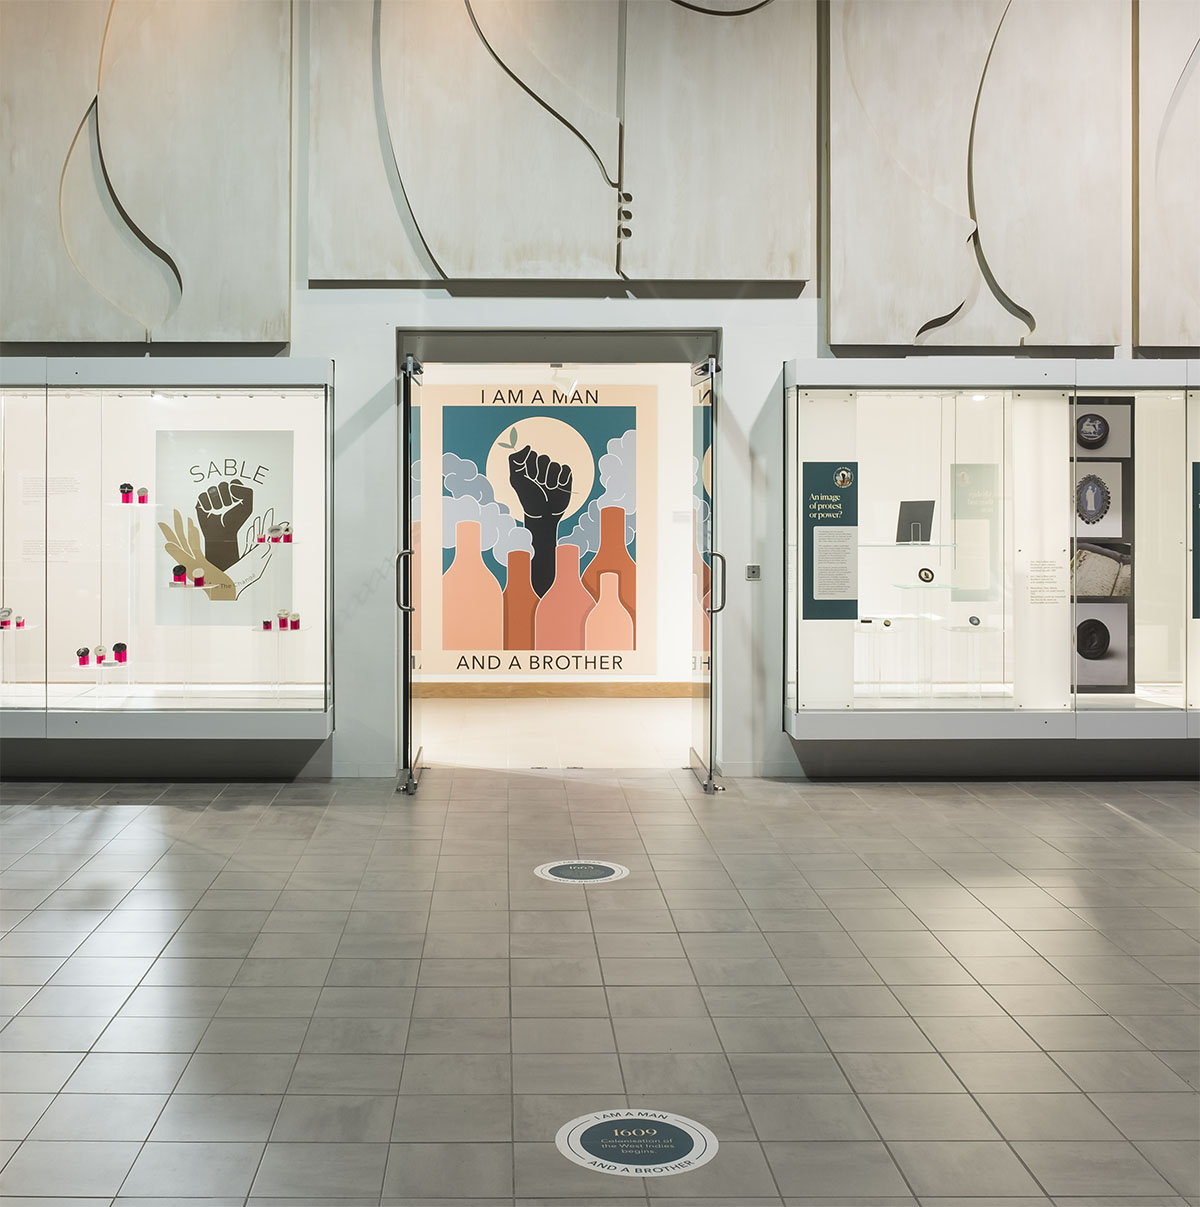 A gallery space at the V&A Wedgwood Collection showing the I am a Man and a Brother display